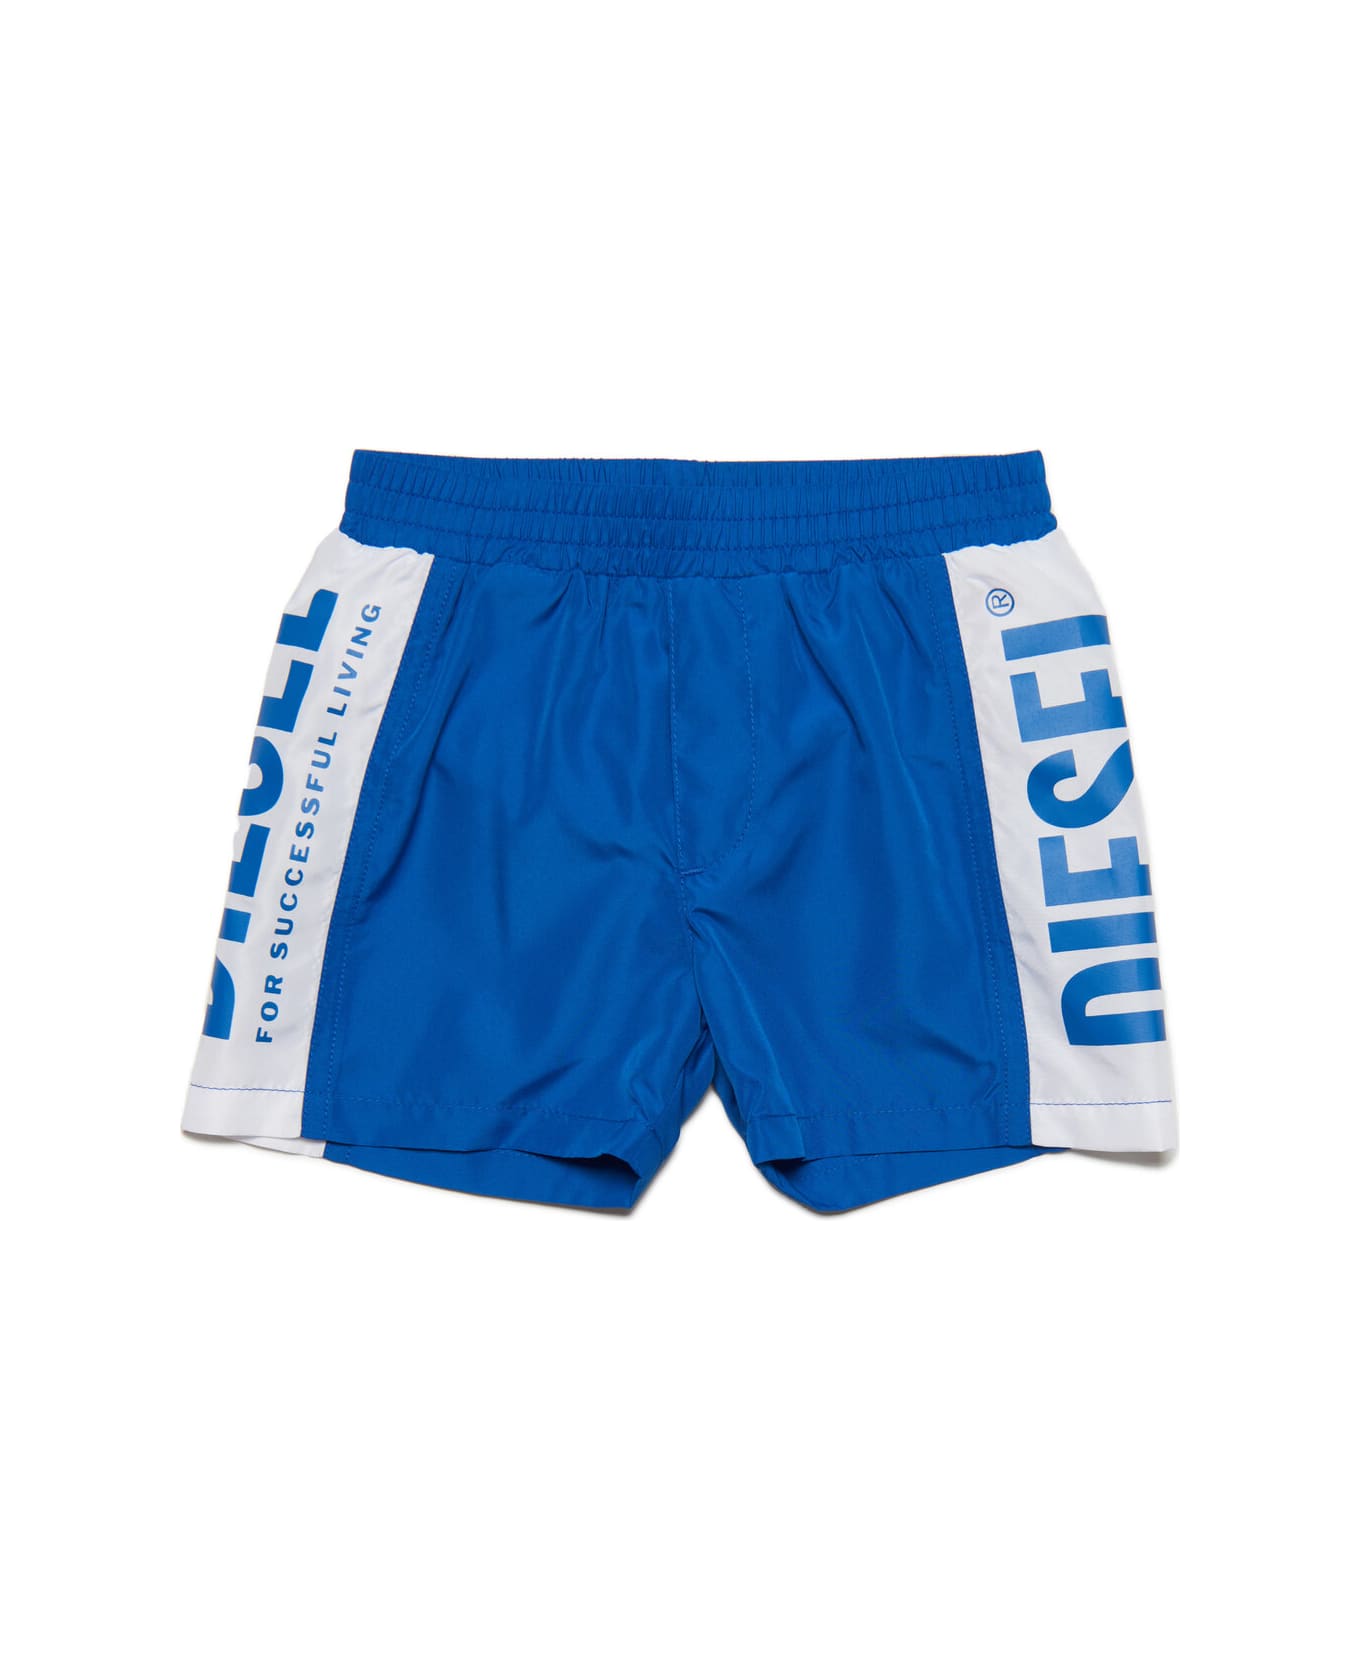 Diesel Mimmob Sw Boxer Diesel Blue Lycra Boxer Swimming Costume With Logo Band - Princess blue